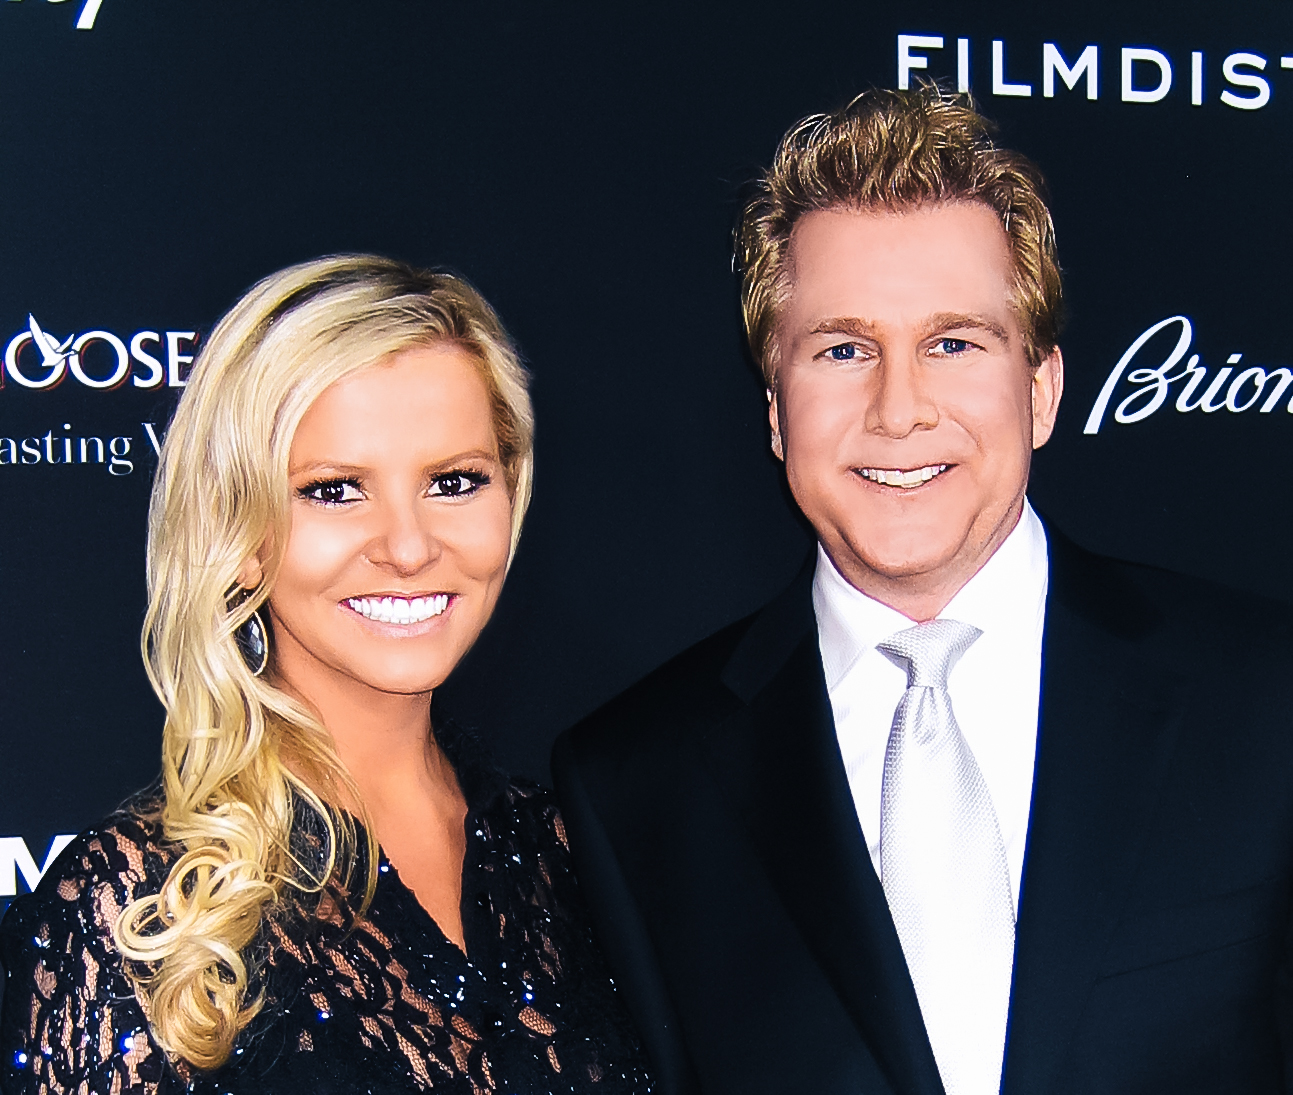 Katrin Benedikt and Creighton Rothenberger at Olympus Has Fallen premiere - ArcLight Cinemas Cinerama Dome on March 18, 2013 in Hollywood, California.